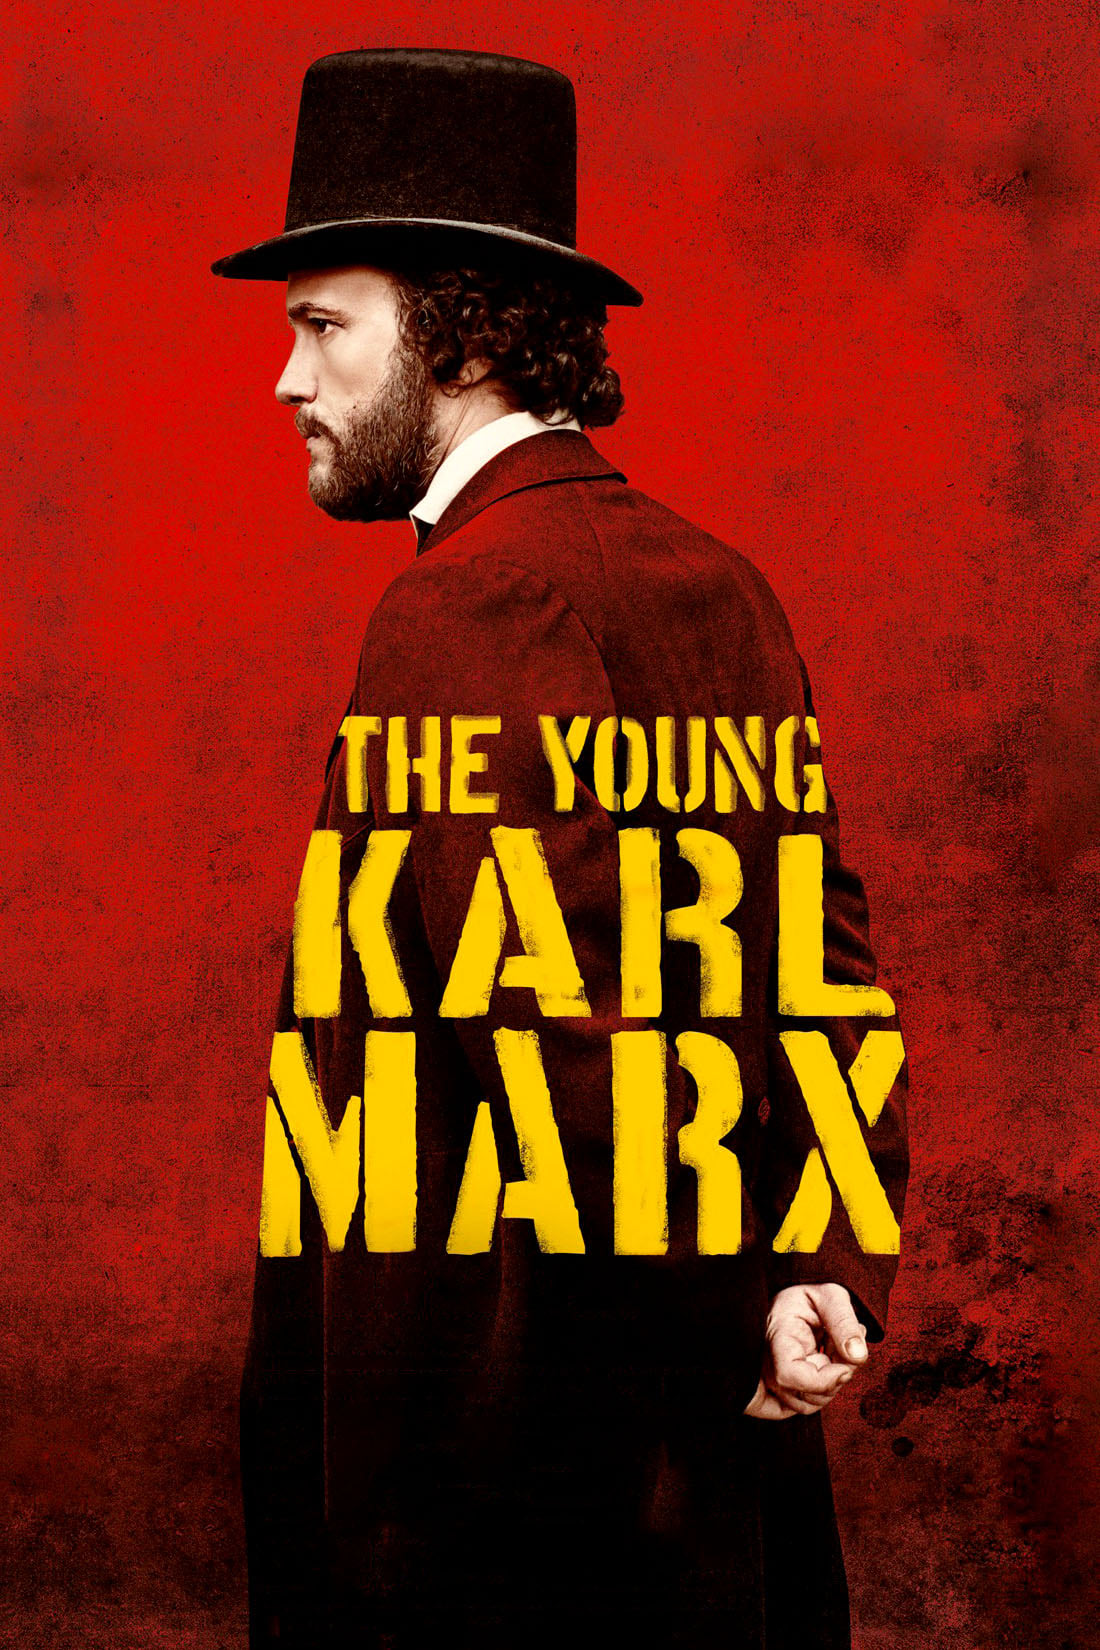 The Young Karl Marx (2017)